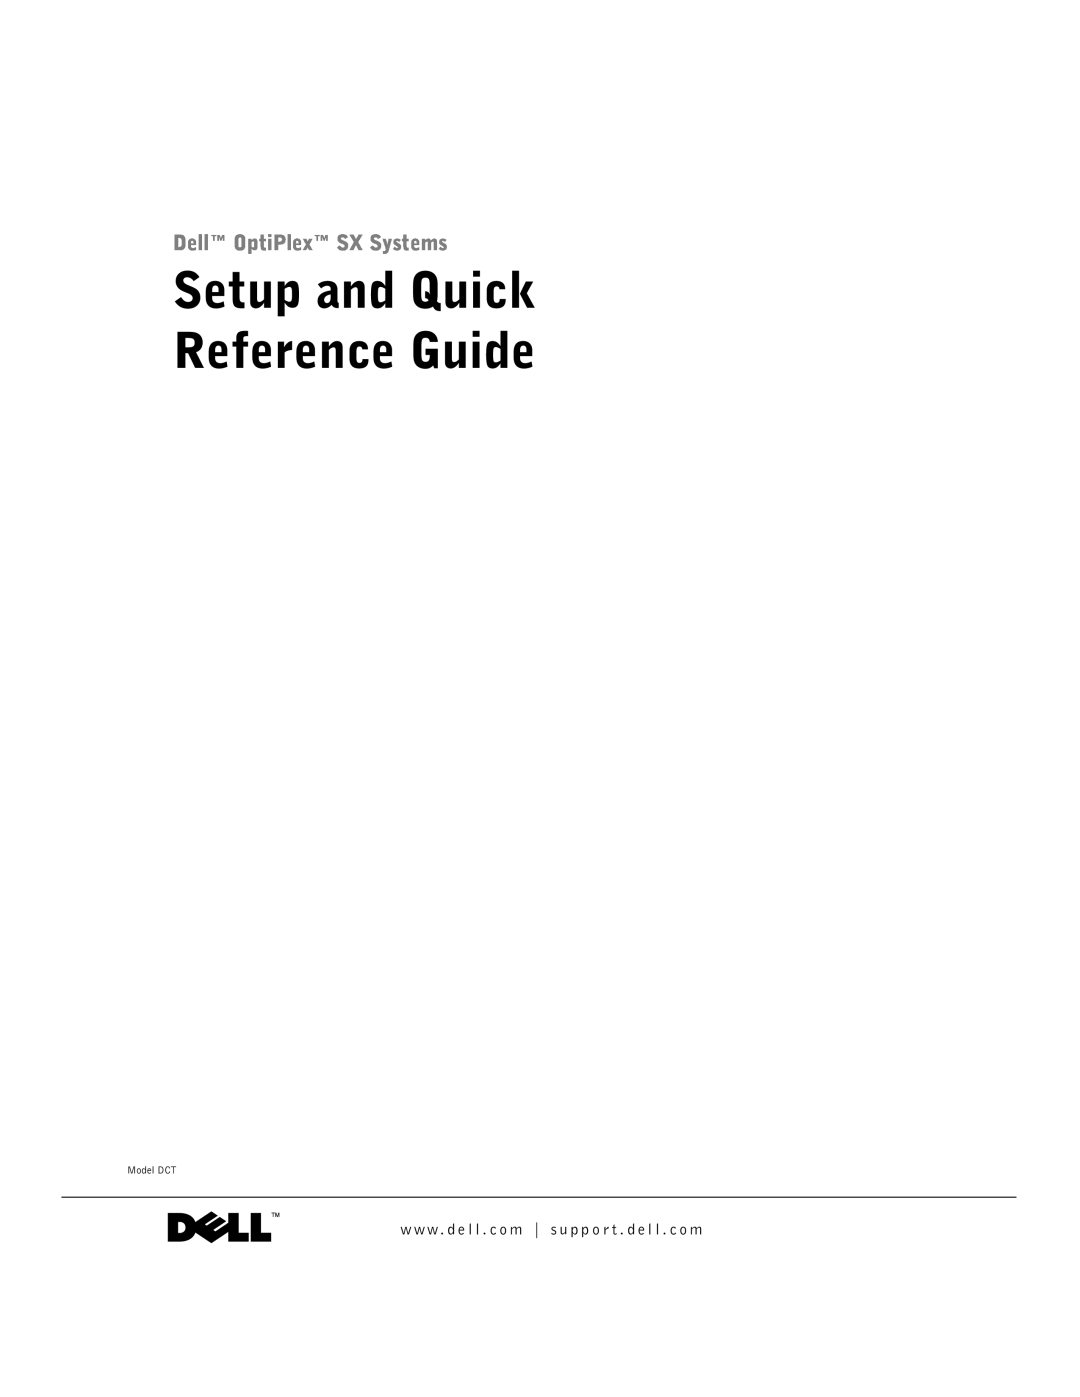 Dell manual Setup and Quick Reference Guide, Dell OptiPlex SX Systems, Model DCT 